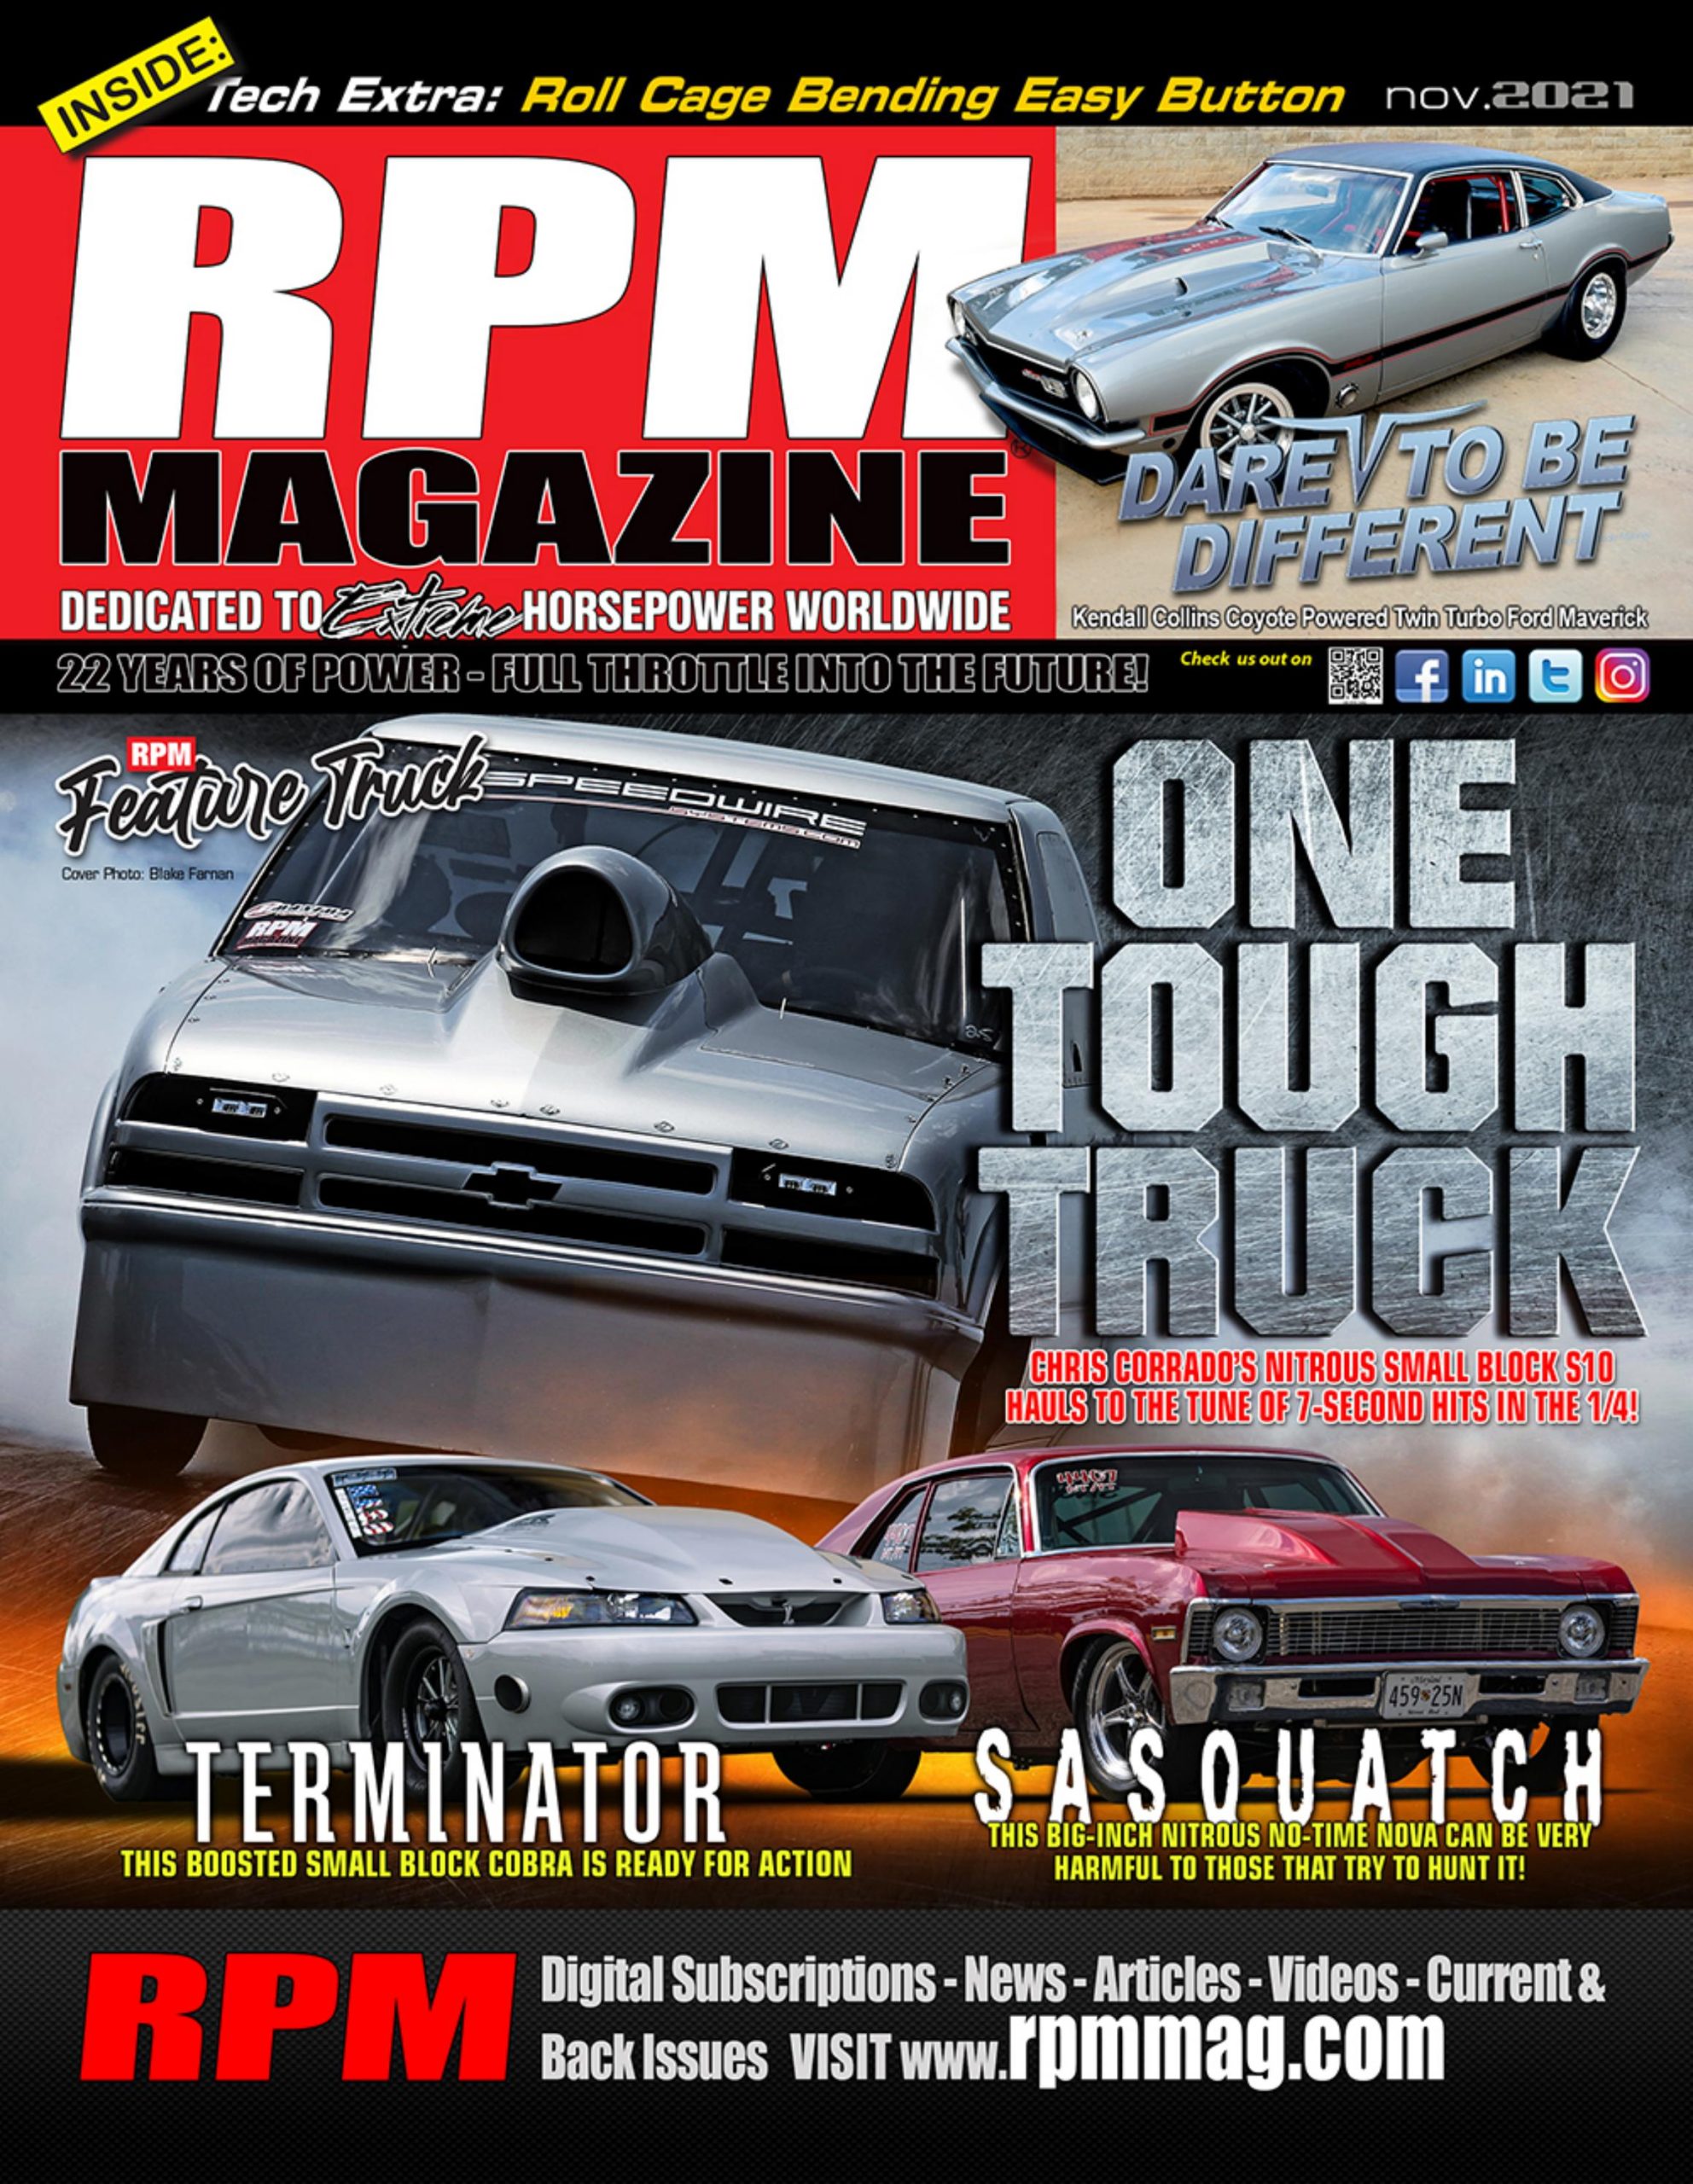 You are currently viewing TERMINATOR – Tommy Bauerlien – Magazine RPM